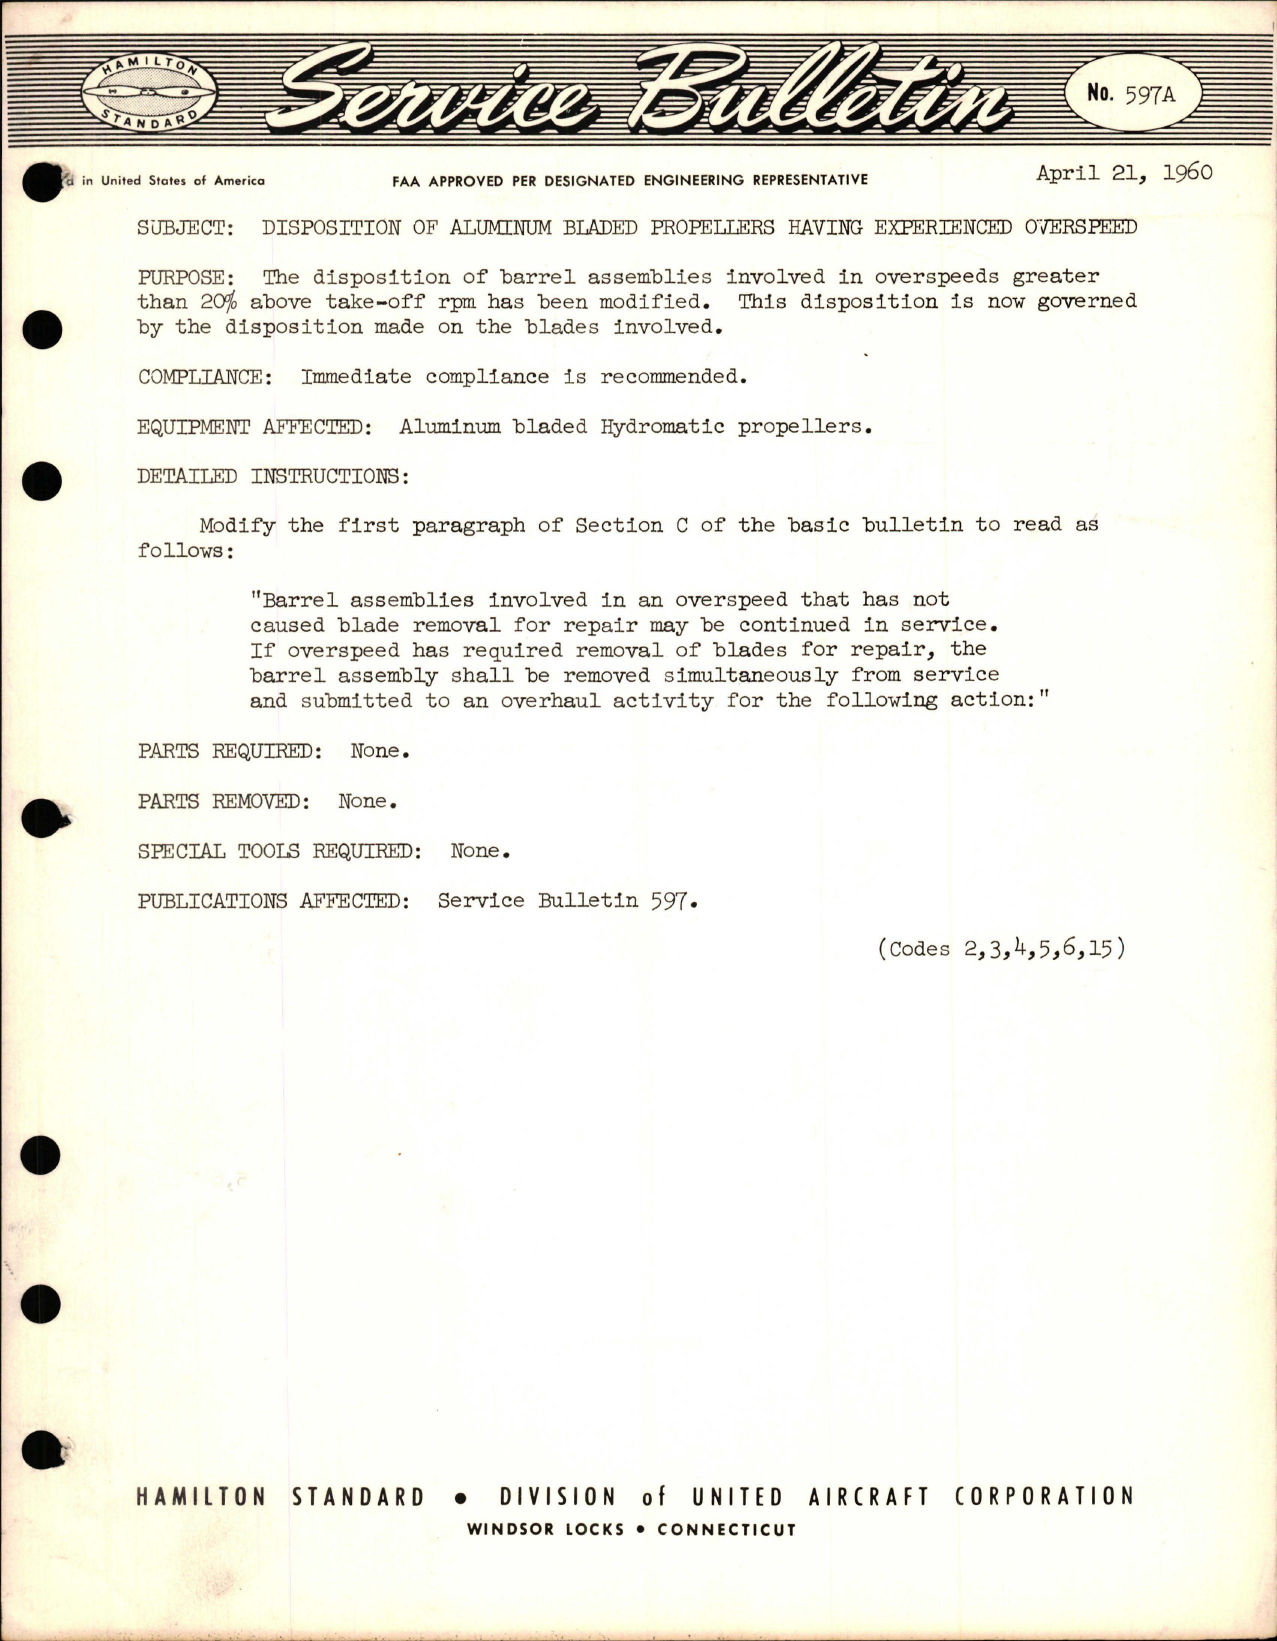 Sample page 1 from AirCorps Library document: Disposition of Aluminum Bladed Propellers Having Experienced Overspeed